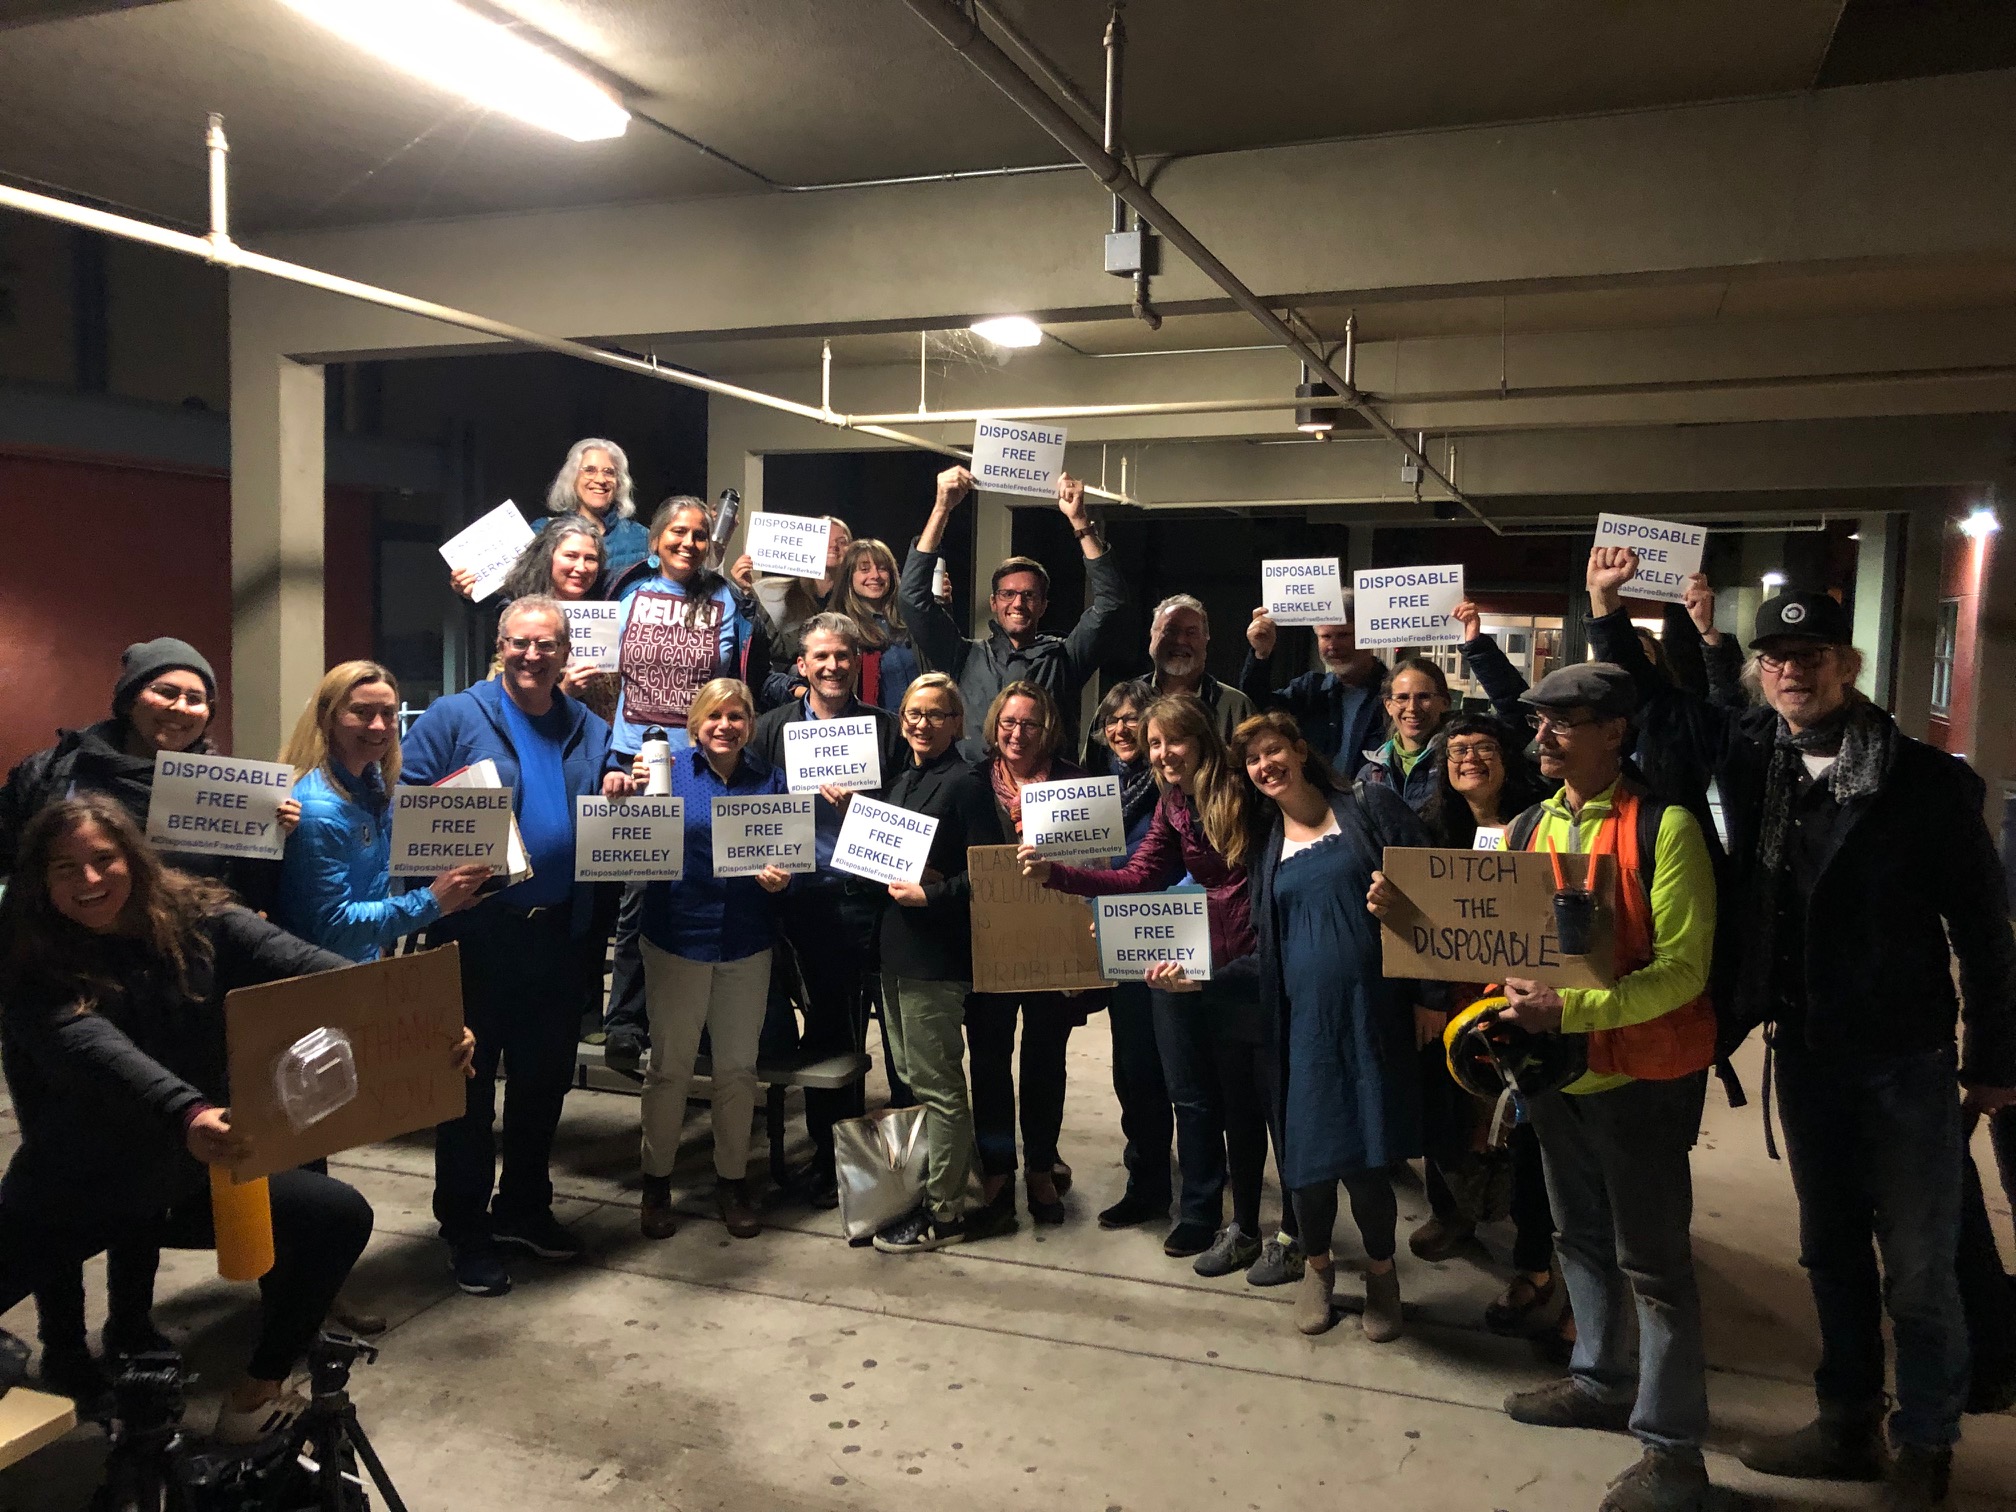 Advocates celebrate the passage of the Berkeley disposable dining ordinance